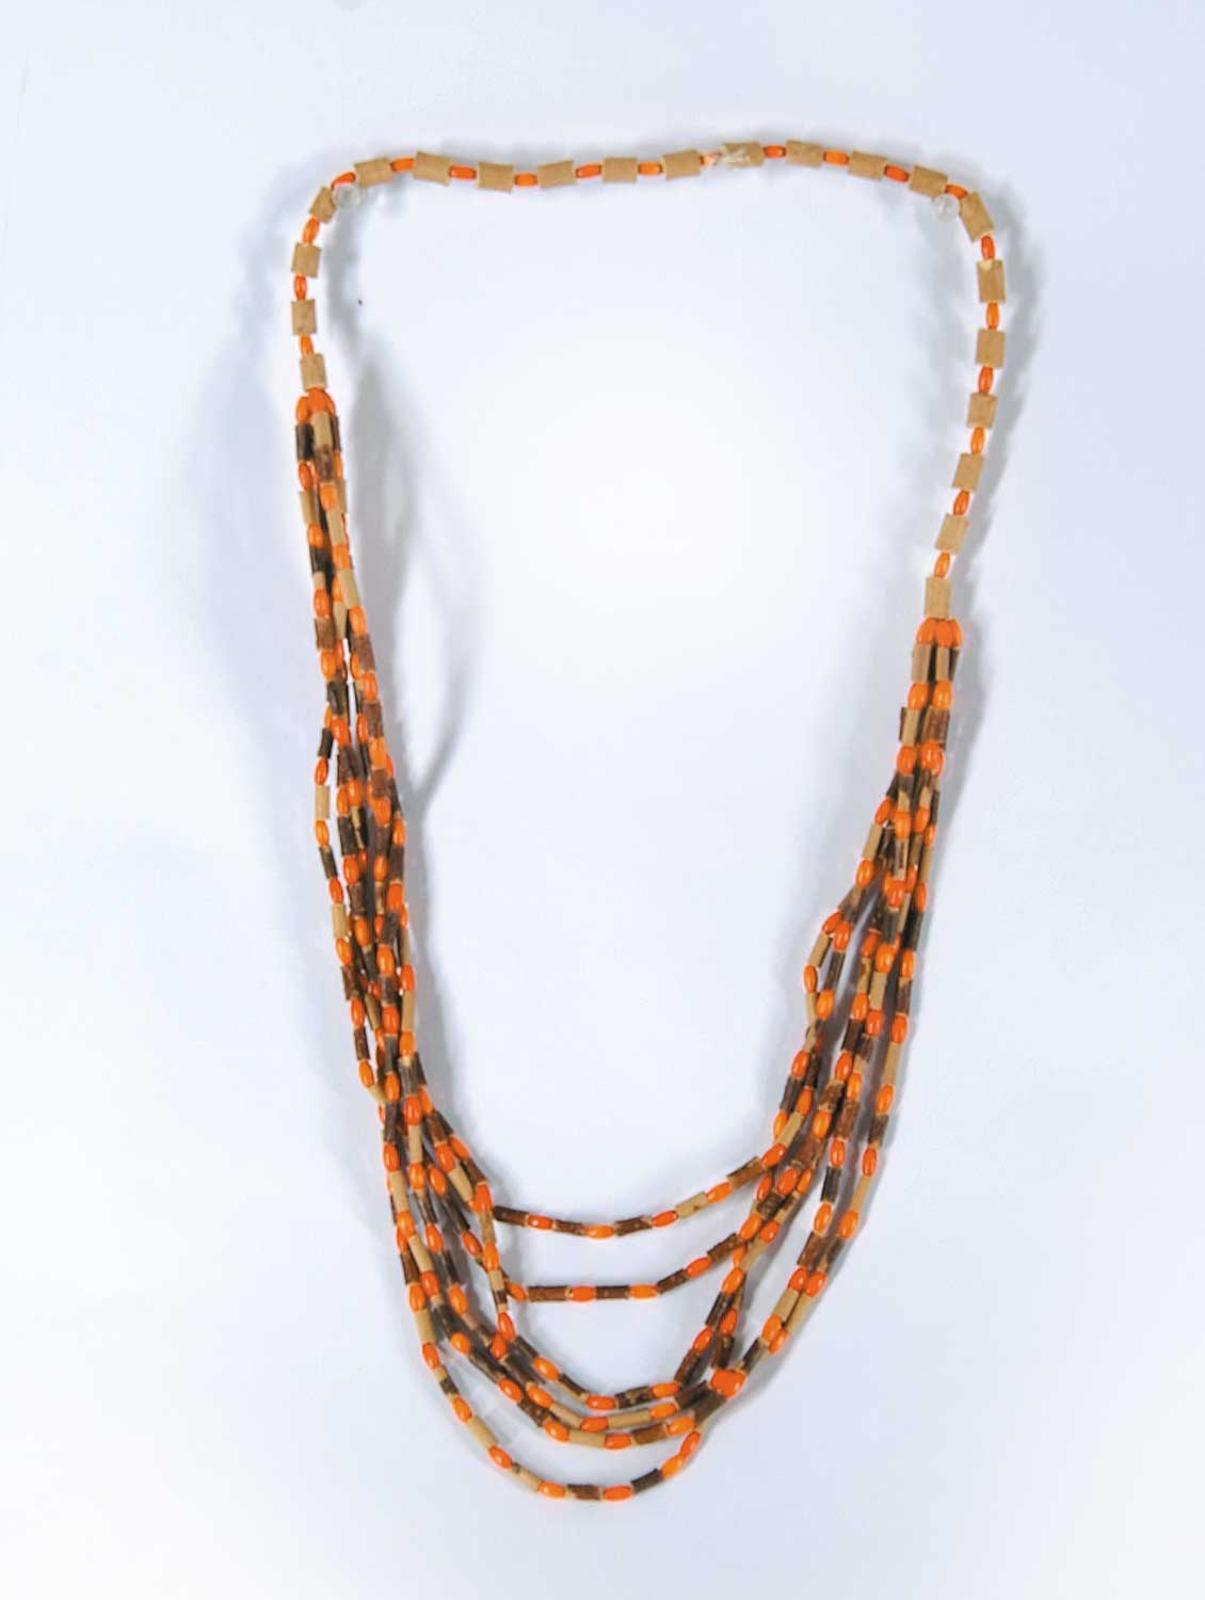 Robert Charles Aller (1922-2008) - Untitled - Red Willow Necklace with Orange Beads